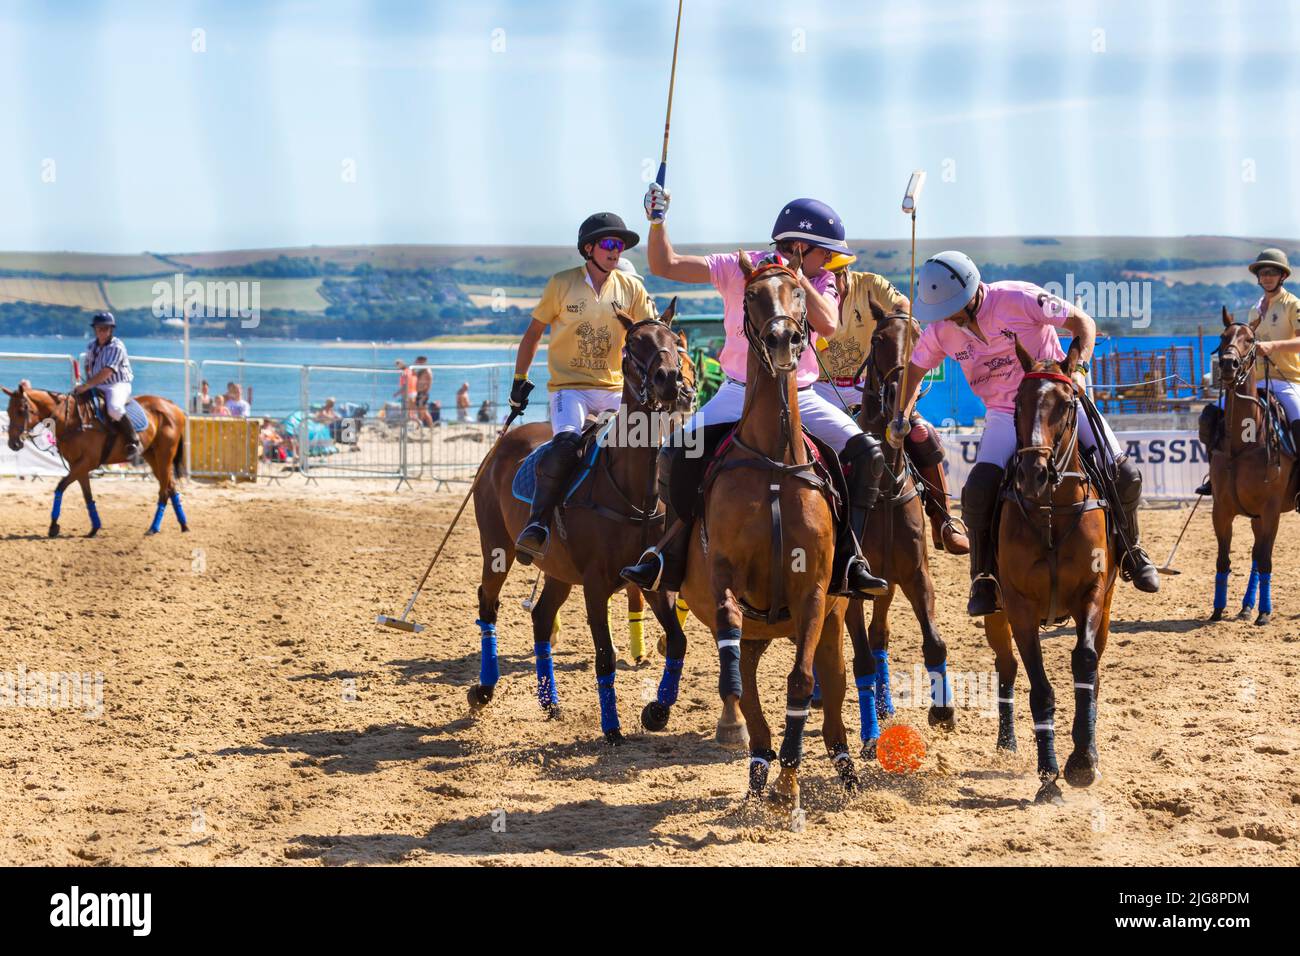 Sandbanks, Poole, Dorset, UK . 8th July 2022. The Sandpolo British Beach Polo Championships gets underway at Sandbanks beach, Poole on a hot sunny day. Celebrating its 15th anniversary the largest beach polo event in the world, the two day event takes place on Friday and Saturday, as visitors head to the beach to see the action. Credit: Carolyn Jenkins/Alamy Live News Stock Photo